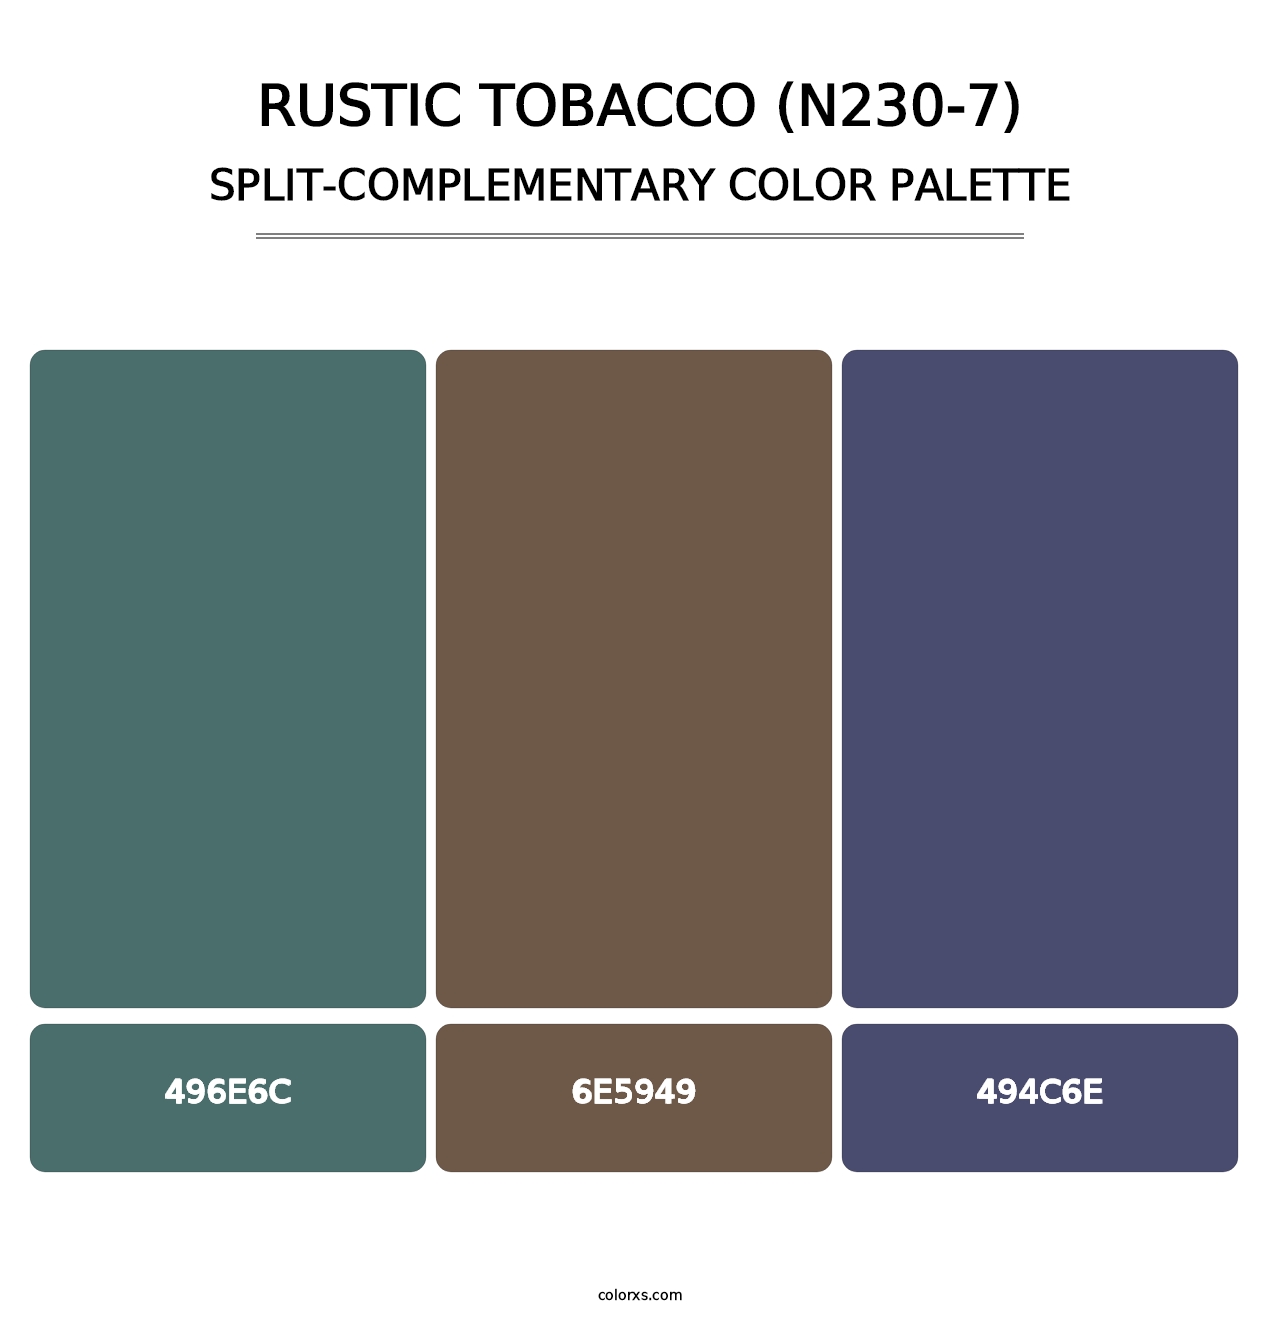 Rustic Tobacco (N230-7) - Split-Complementary Color Palette